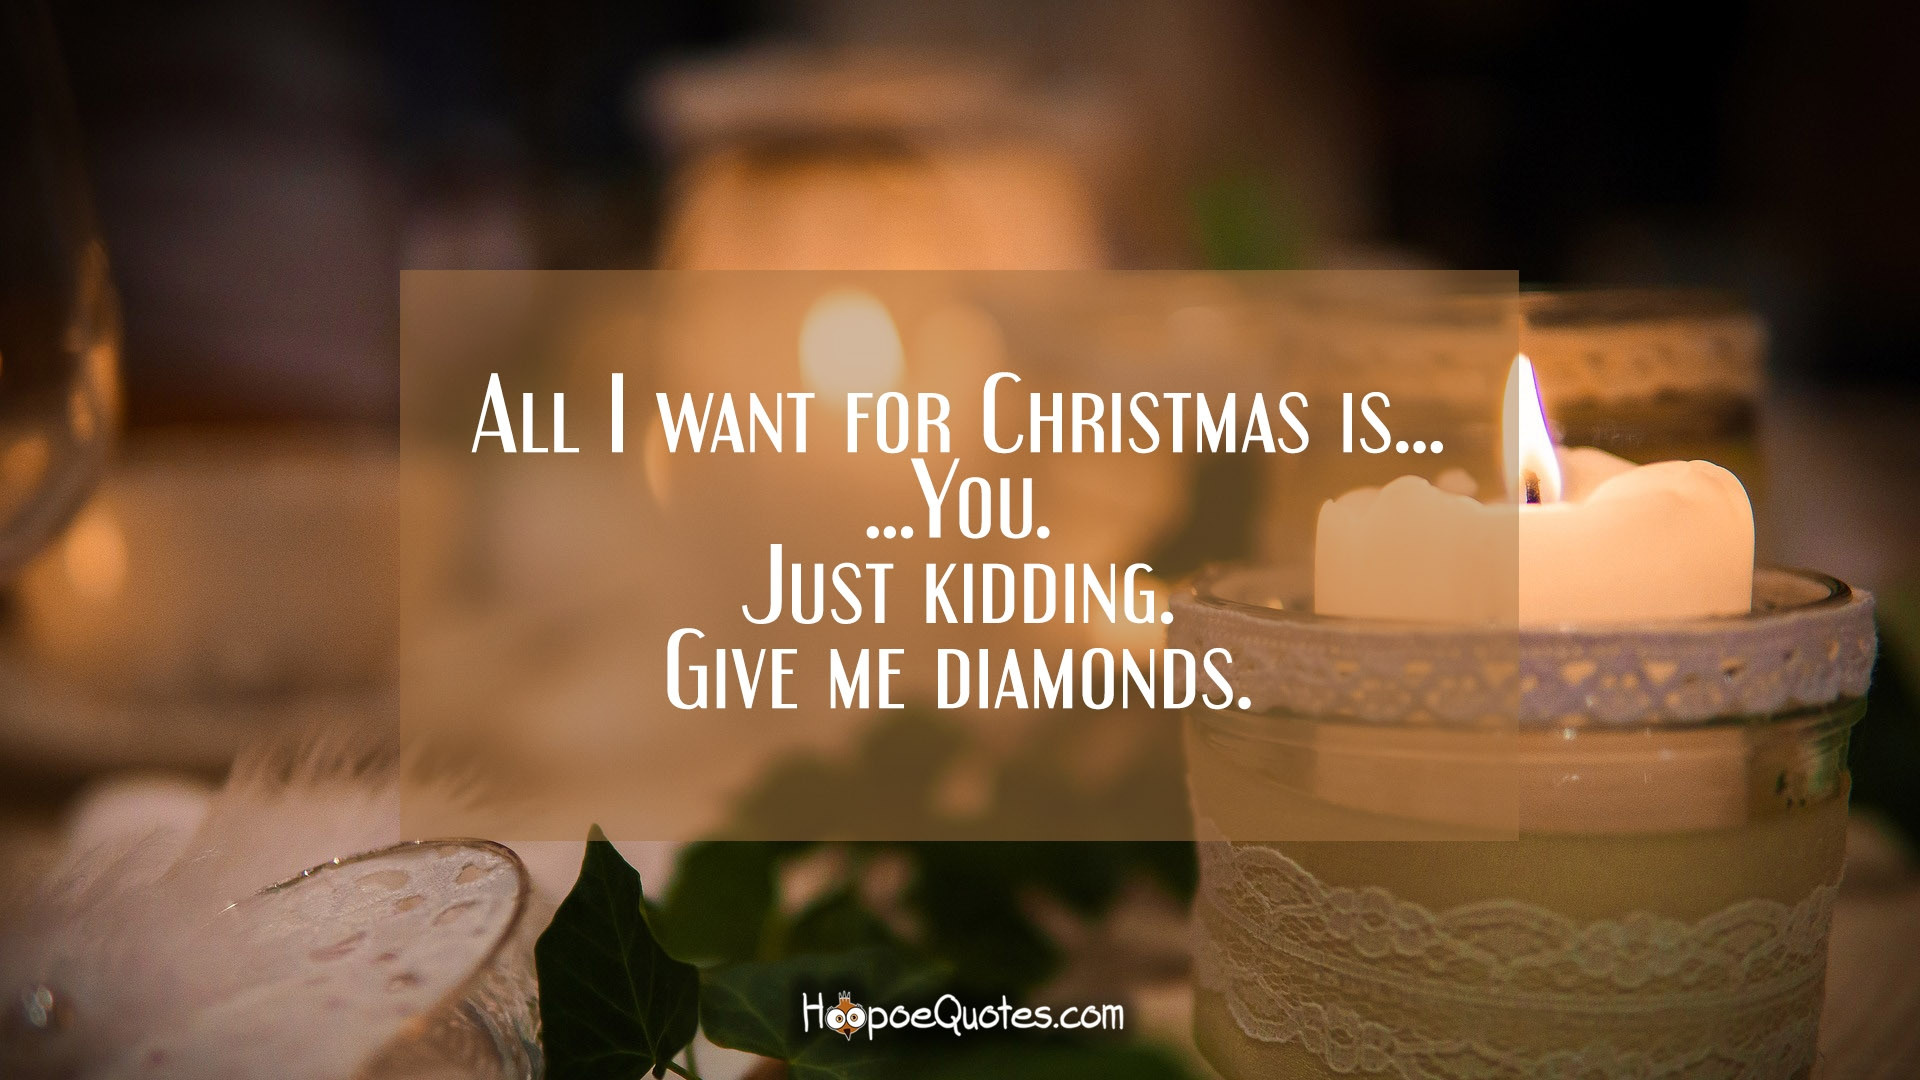 All I Want For Christmas Quotes
 All I want for Christmas is You Just kidding Give me